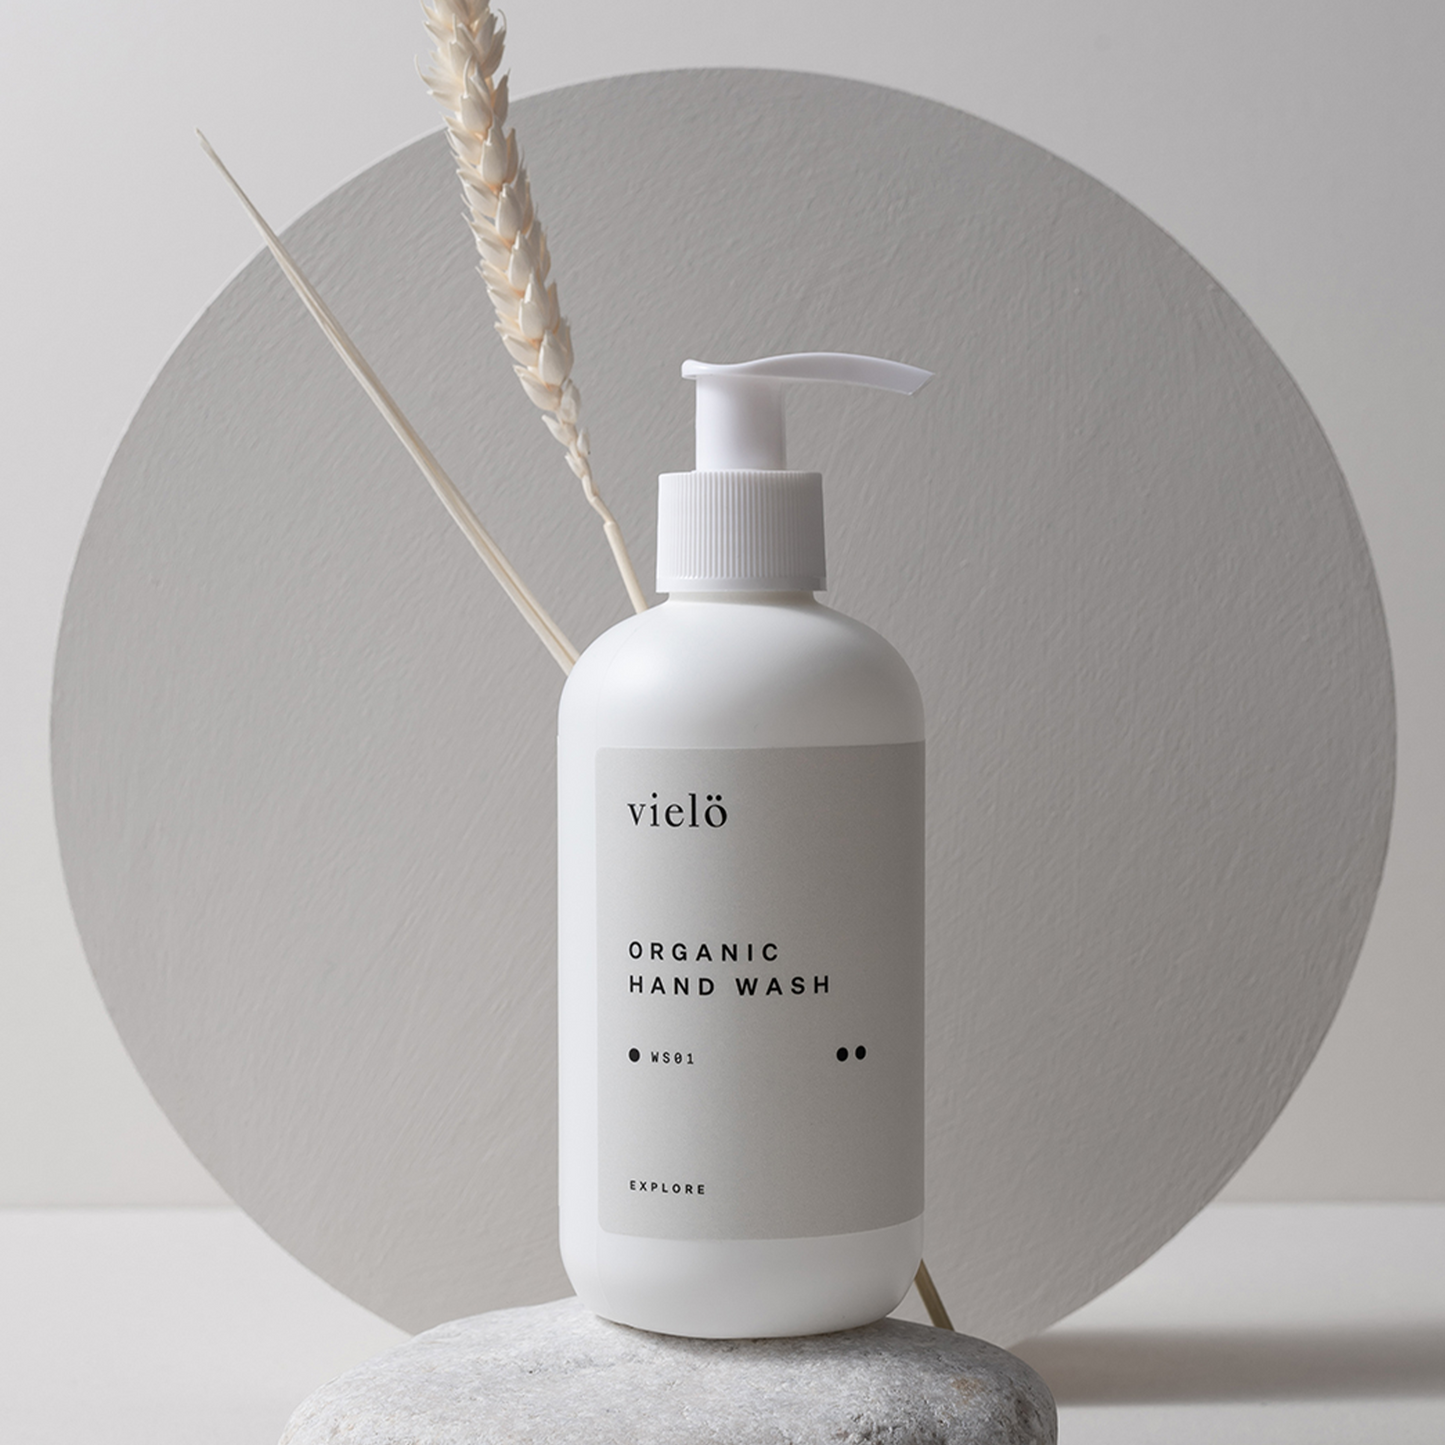 Vielo Organic Hand Wash: Nourishing organic hand wash, specially designed to cleanse gently while leaving the hands soft and smooth. Suitable for all skin types.